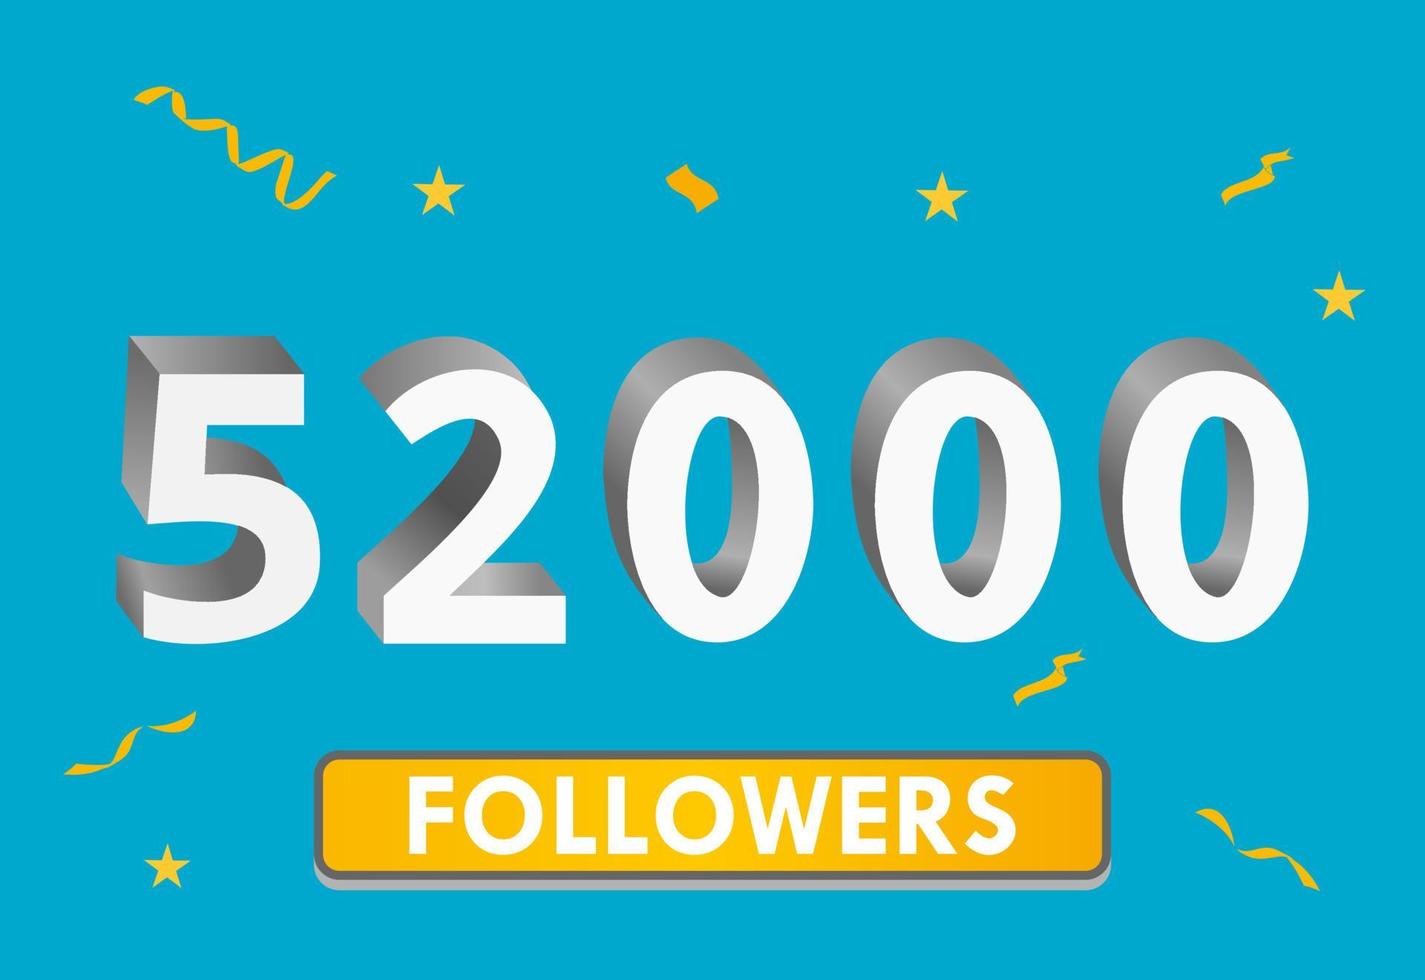 Illustration 3d numbers for social media 52k likes thanks, celebrating subscribers fans. Banner with 52000 followers vector